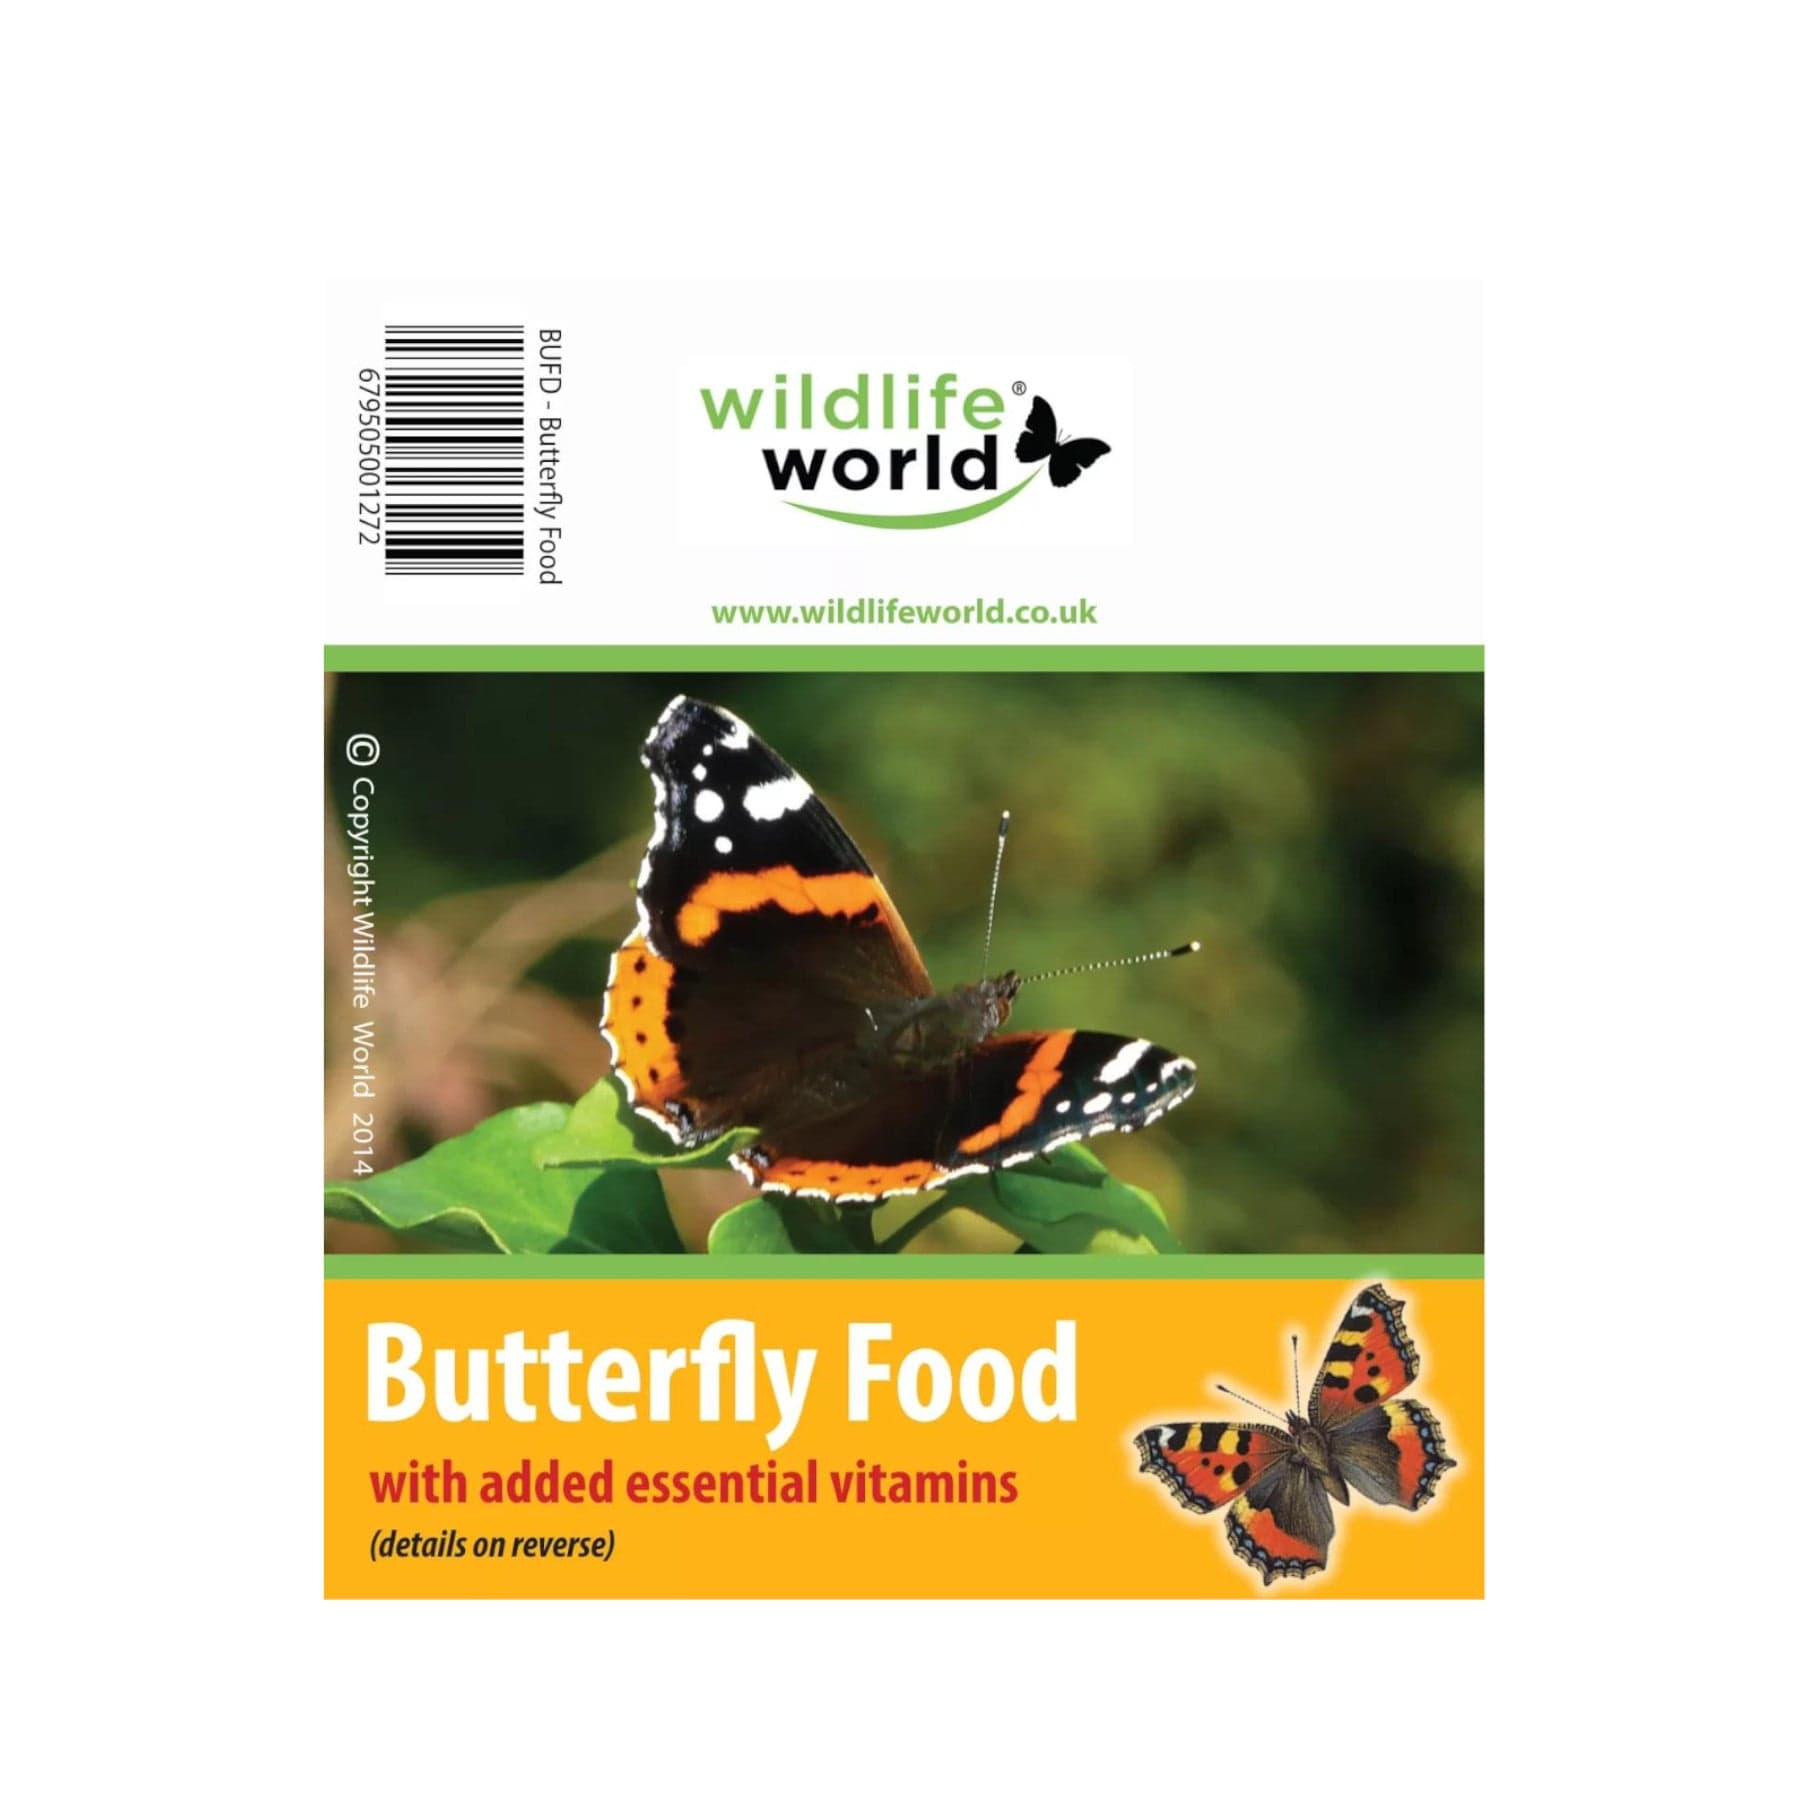 Wildlife World butterfly food packaging with a vivid image of a red admiral butterfly perched on green foliage, essential vitamins advertisement and a barcode displayed on a yellow background.